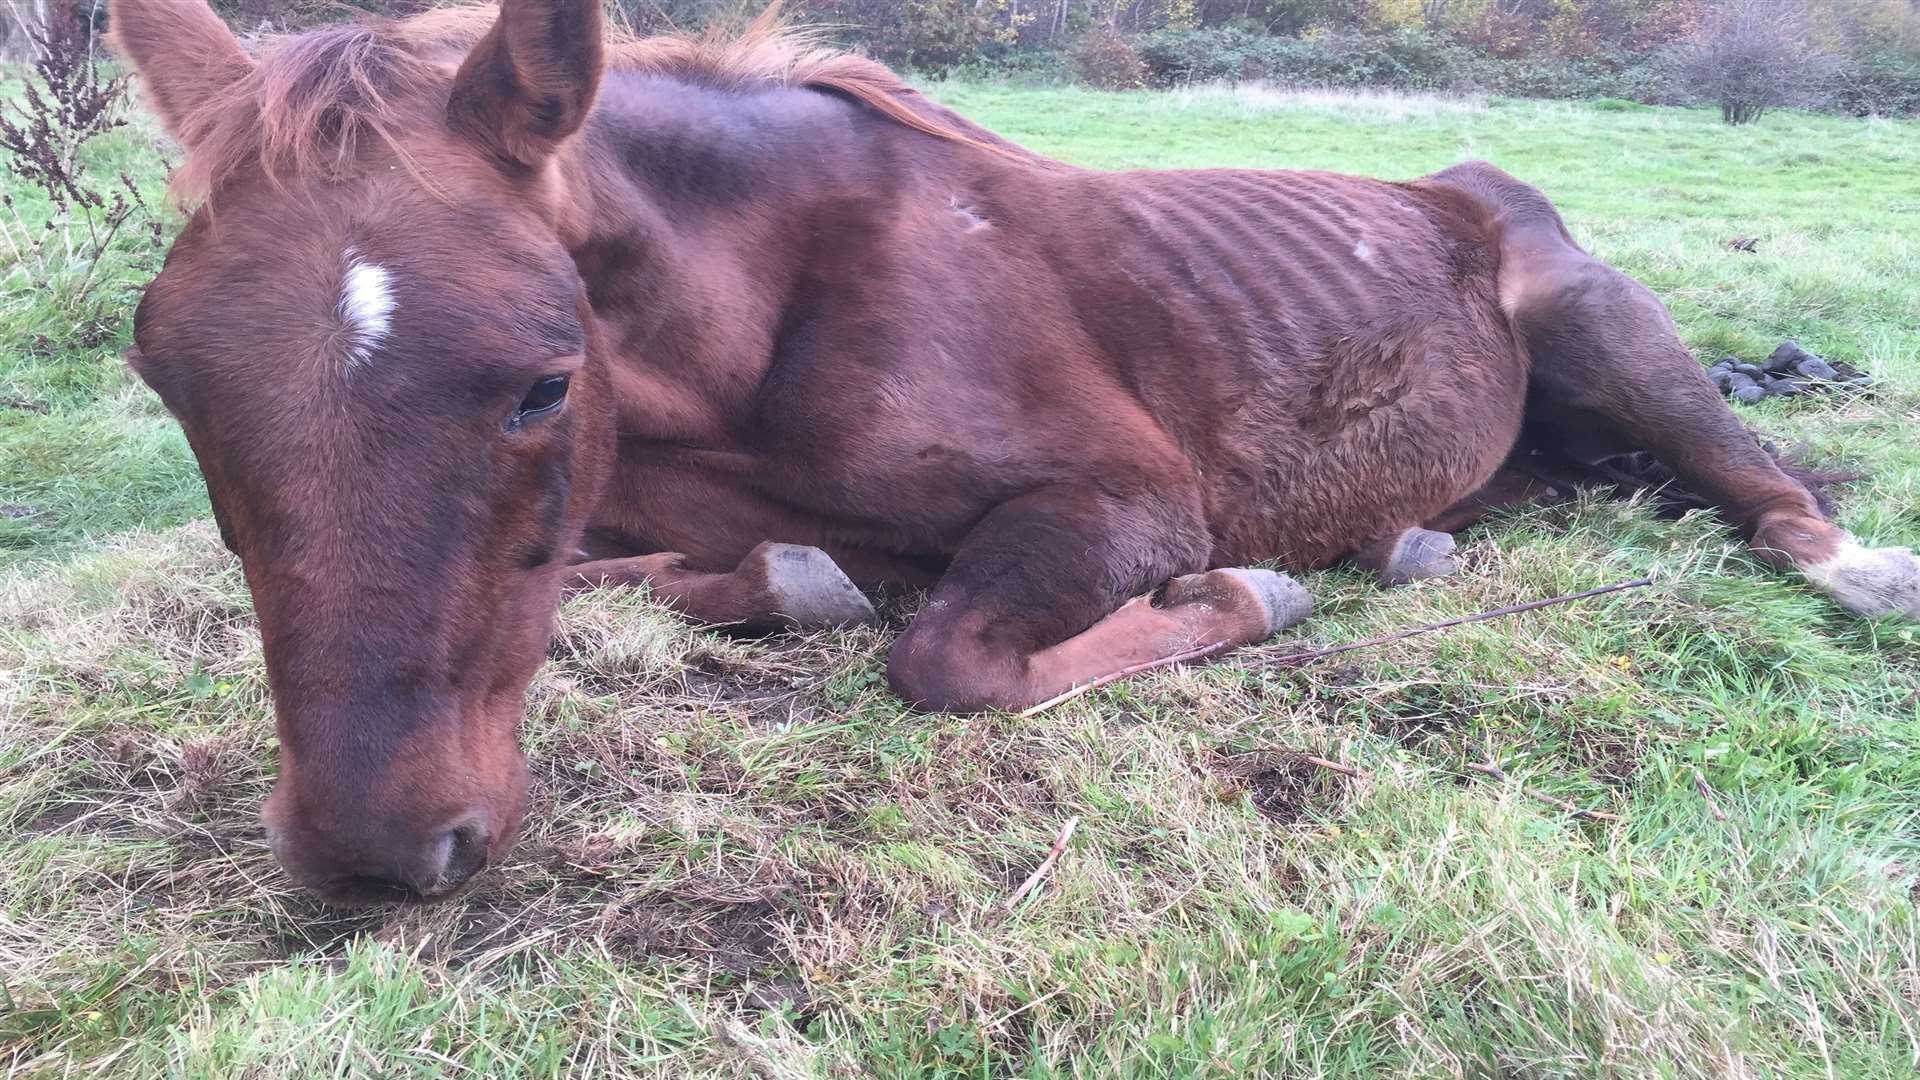 The horse died within hours